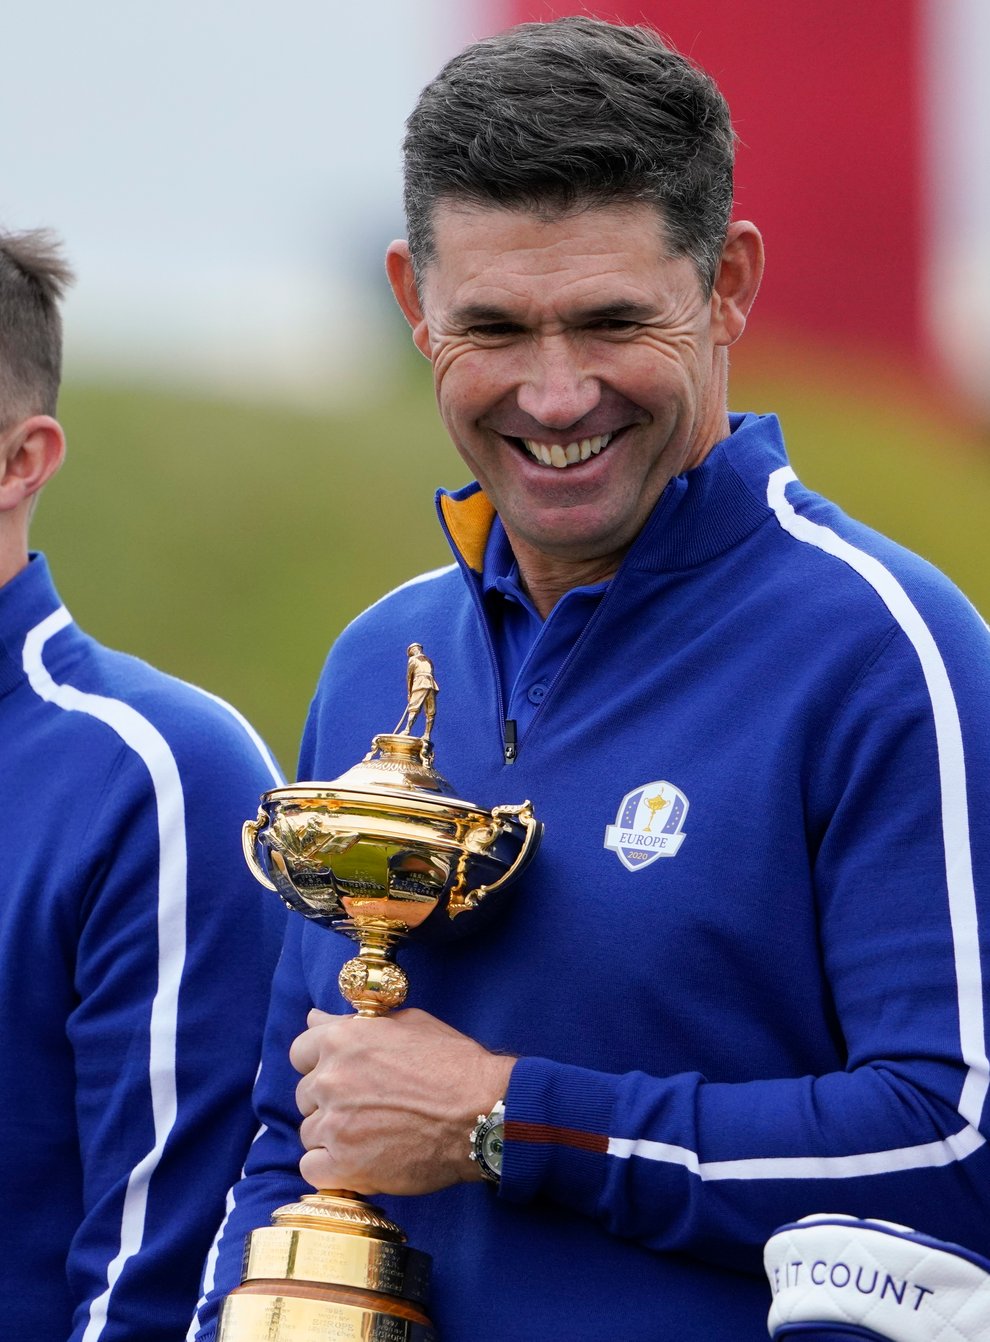 Rory McIlroy (left) and Matt Fitzpatrick (centre) have been reminded of their place in Ryder Cup history by captain Padraig Harrington (Jeff Roberson/AP)